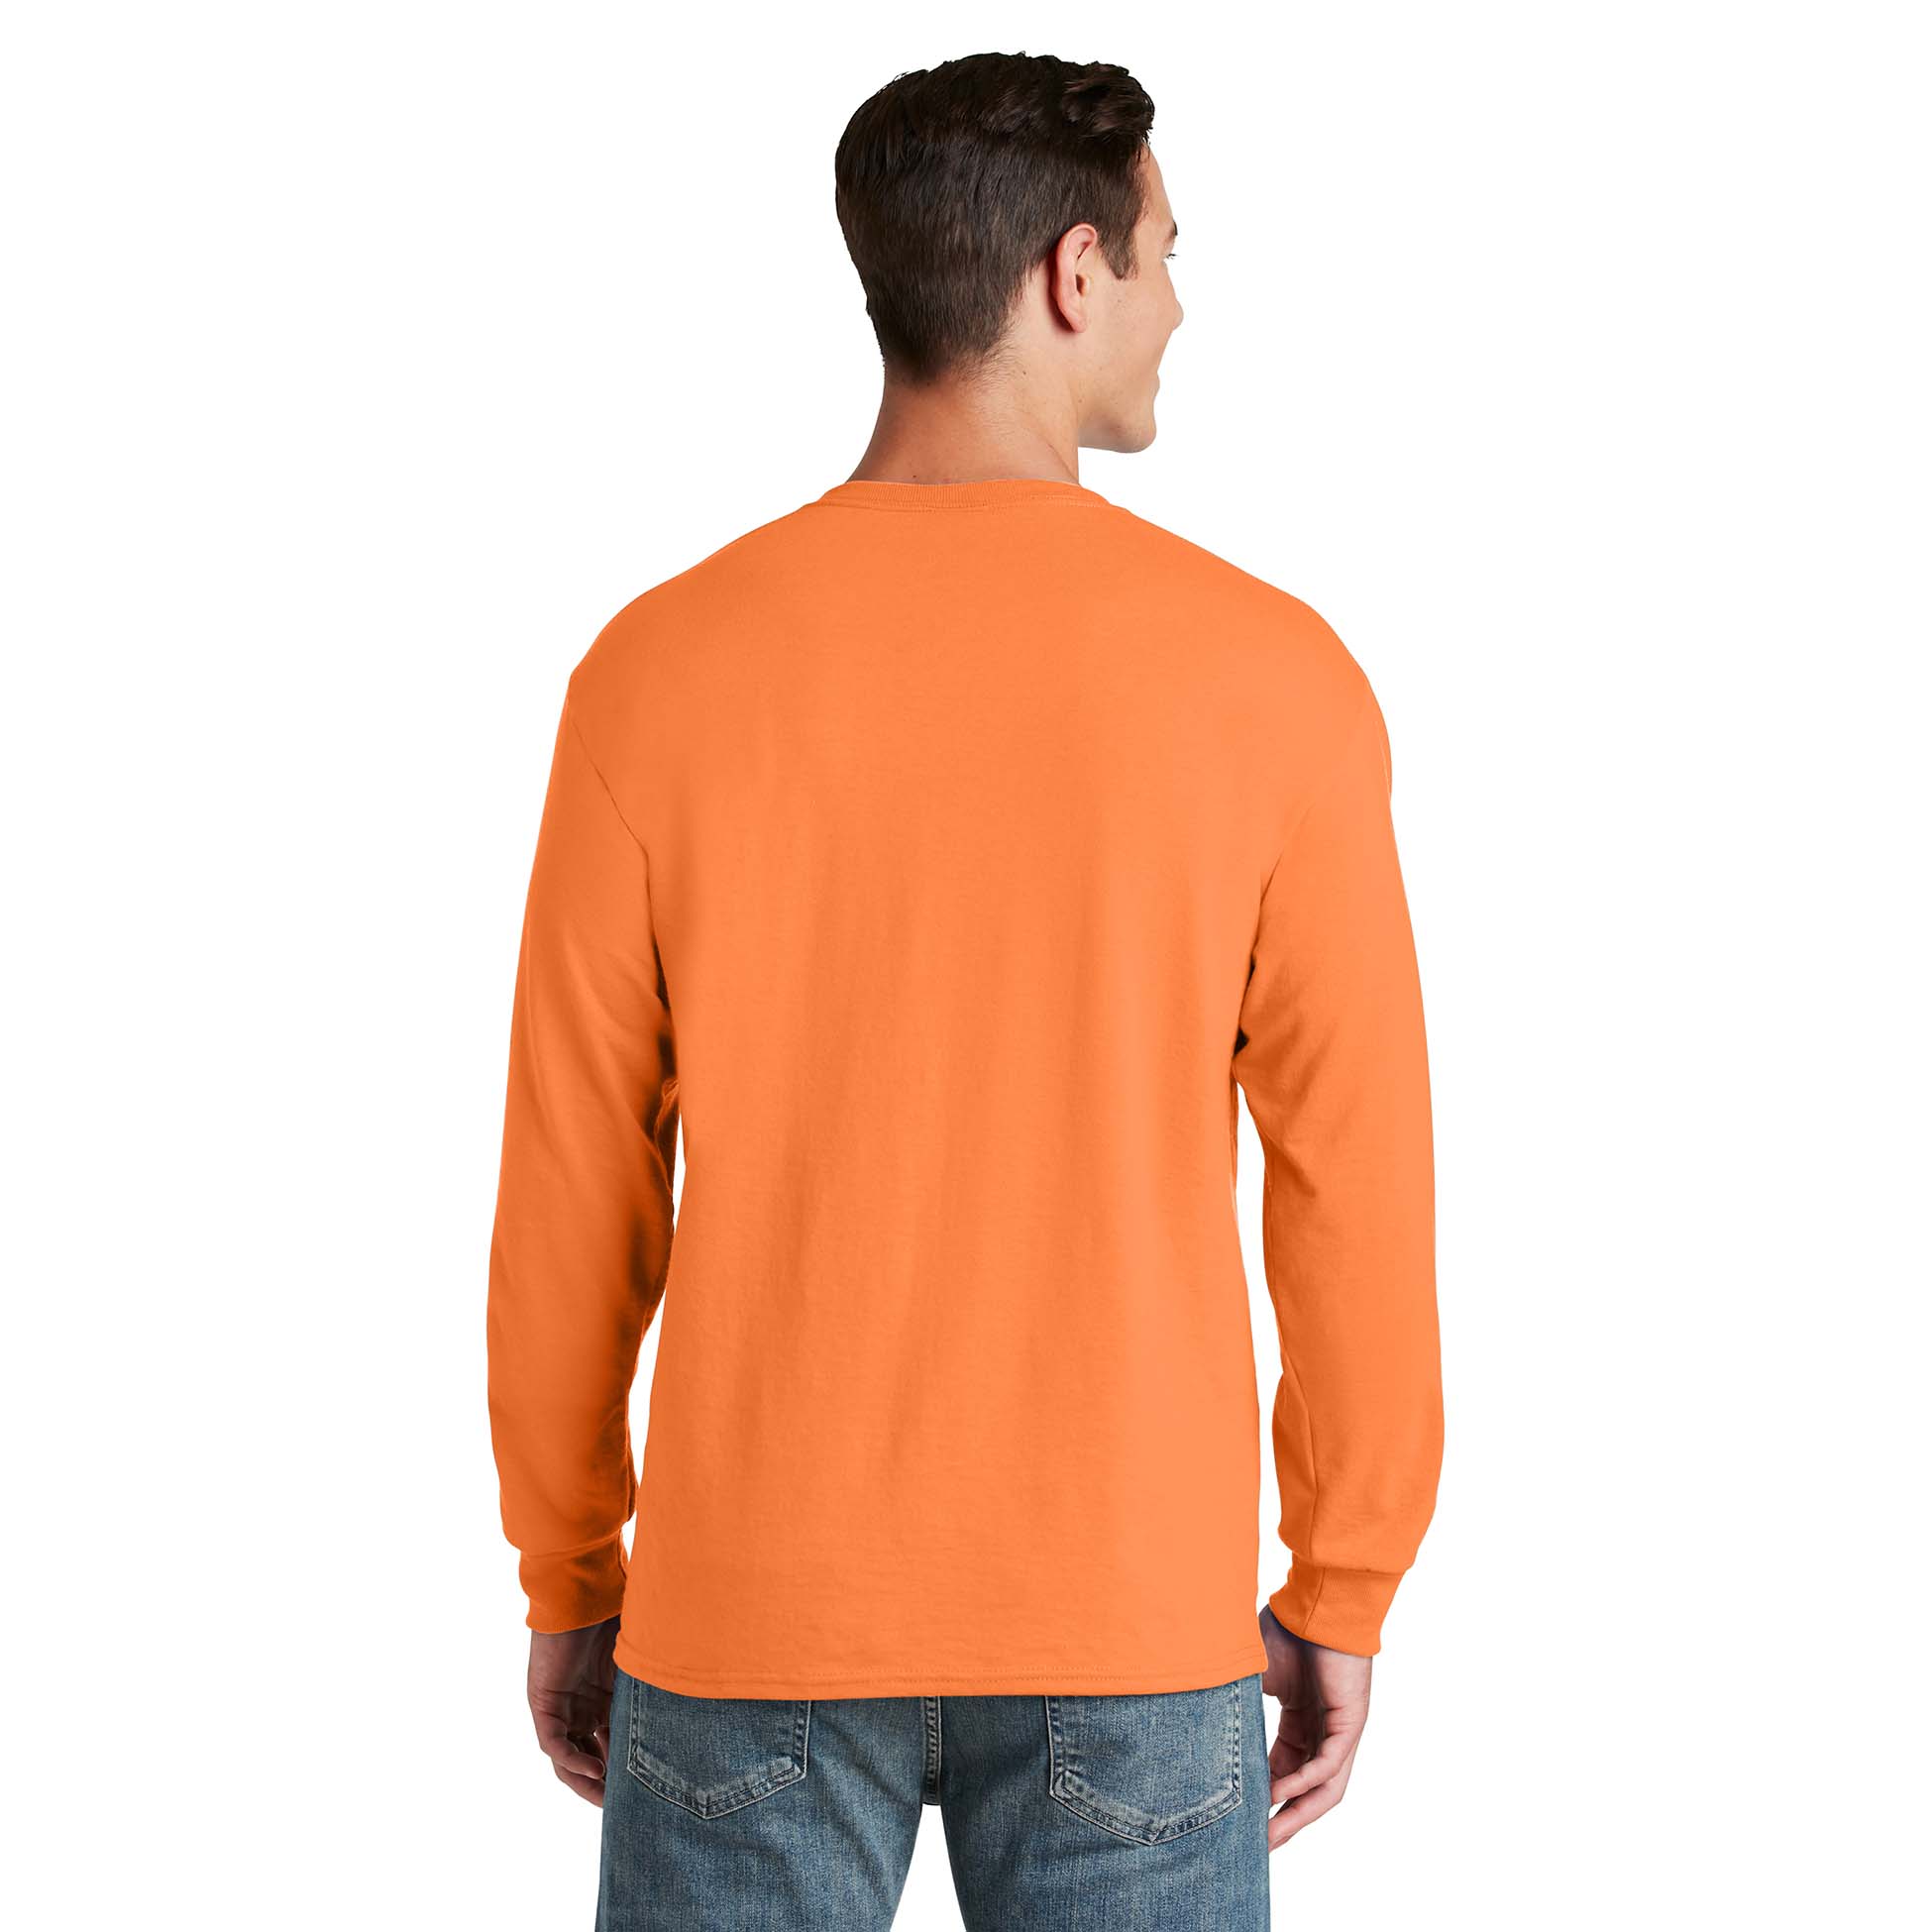 Jerzees 29LS Dri-Power 50/50 Cotton/Poly Long Sleeve T-Shirt - Safety ...